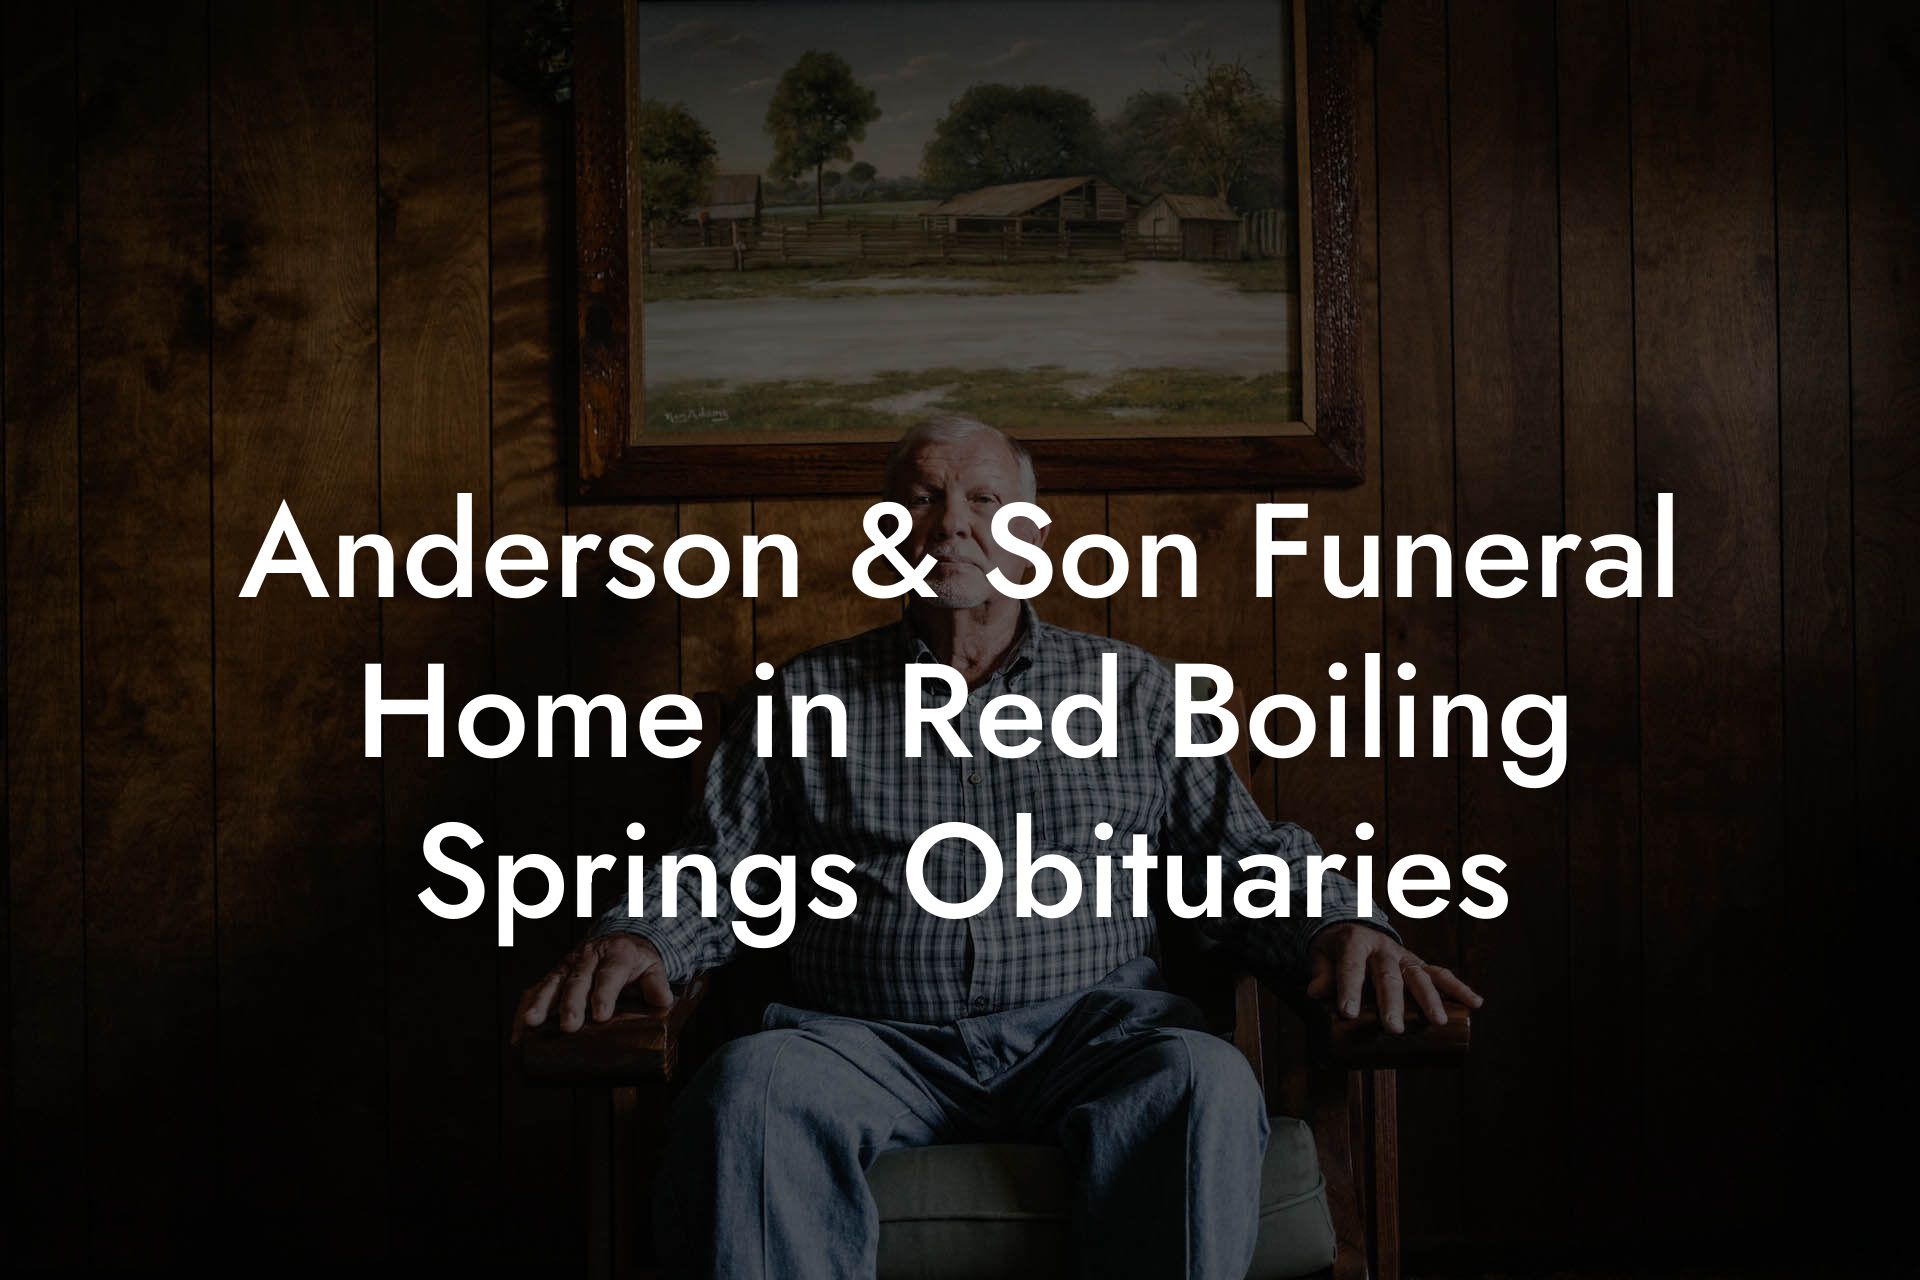 Anderson & Son Funeral Home in Red Boiling Springs Obituaries